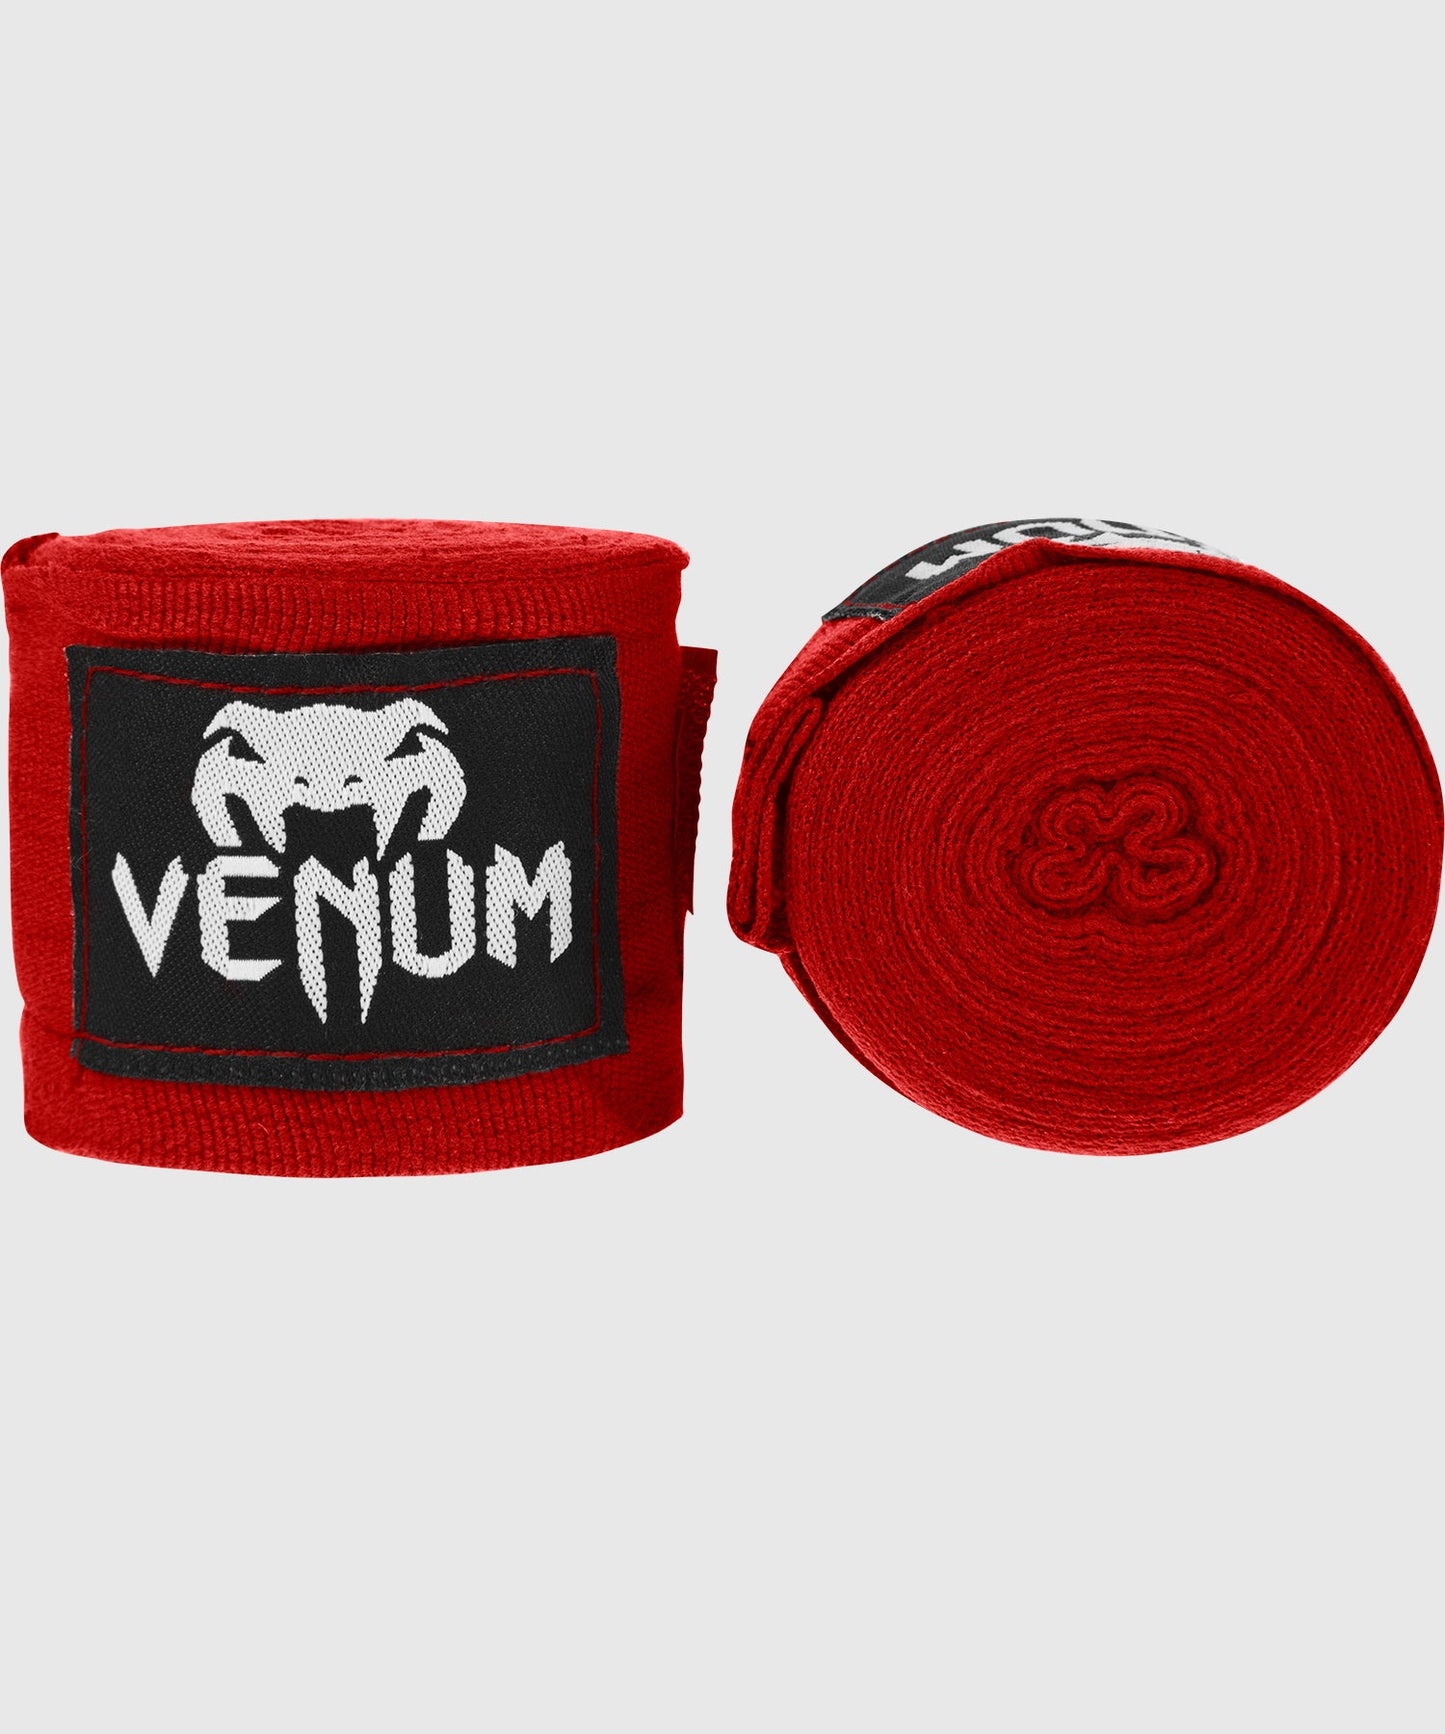 Venum Kontact Boxing Hand Wraps - Red - 157 in